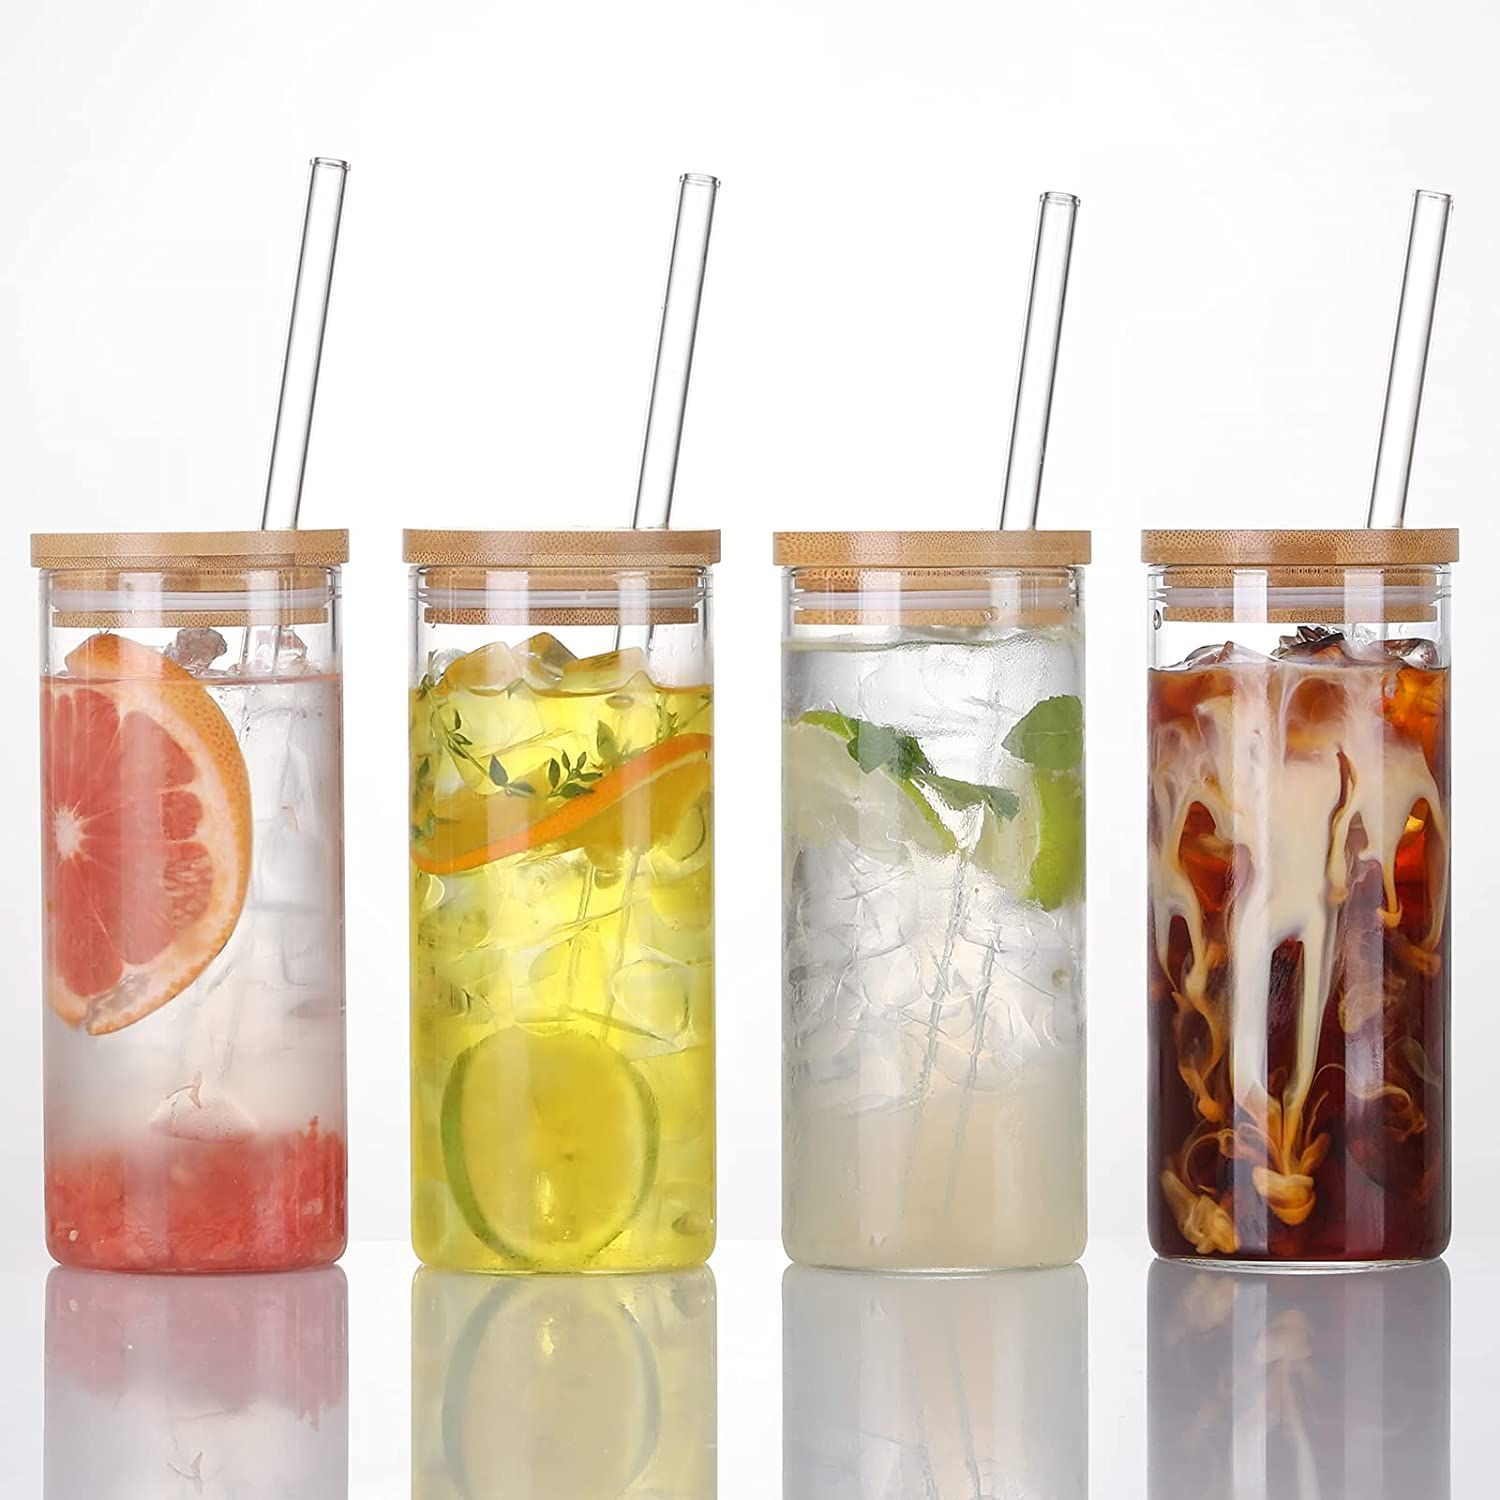 EcoTumb 20oz Glass Tumbler With Bamboo Lid & Straw Clear, Reusable, Travel  Friendly SS1102 From Supercups666, $4.51